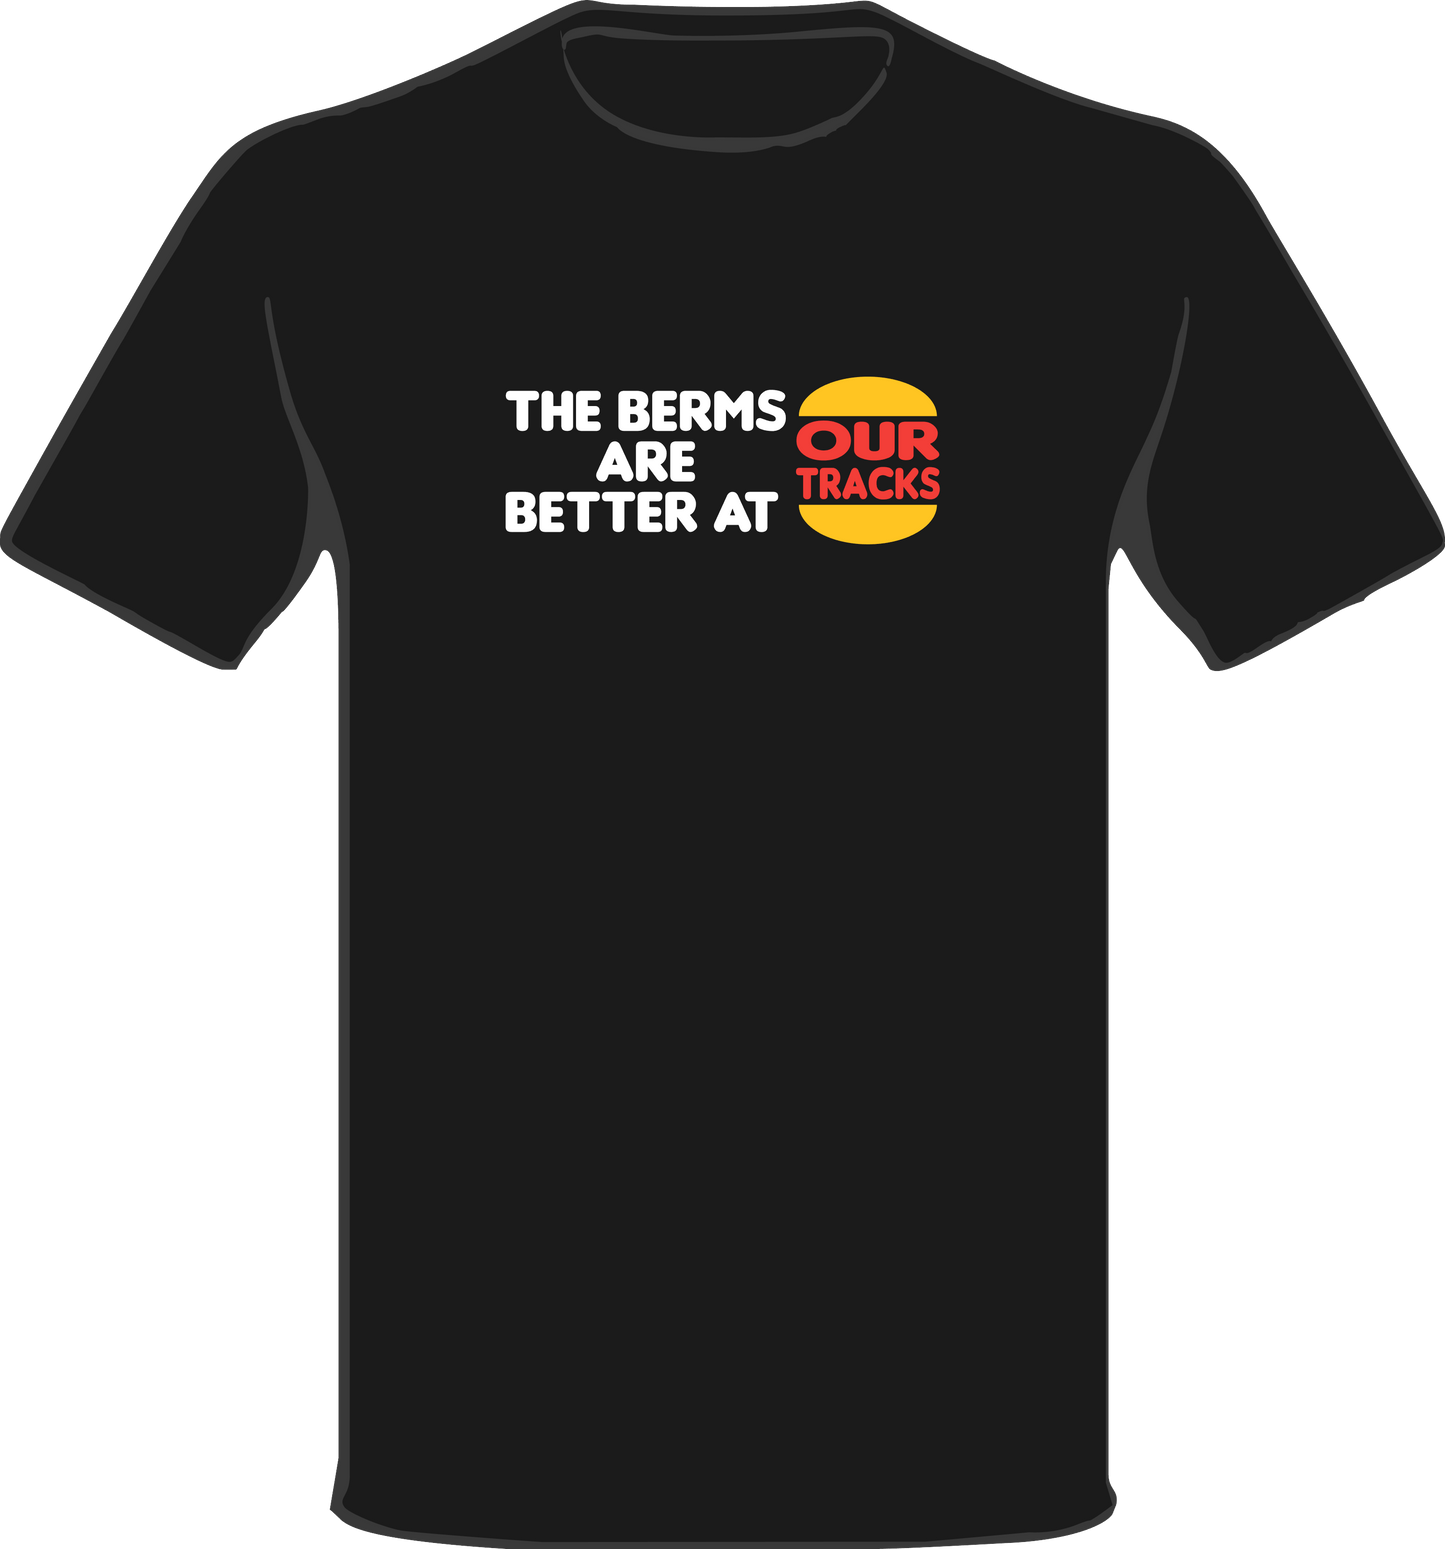 QS - The Berms are better. T-Shirt.